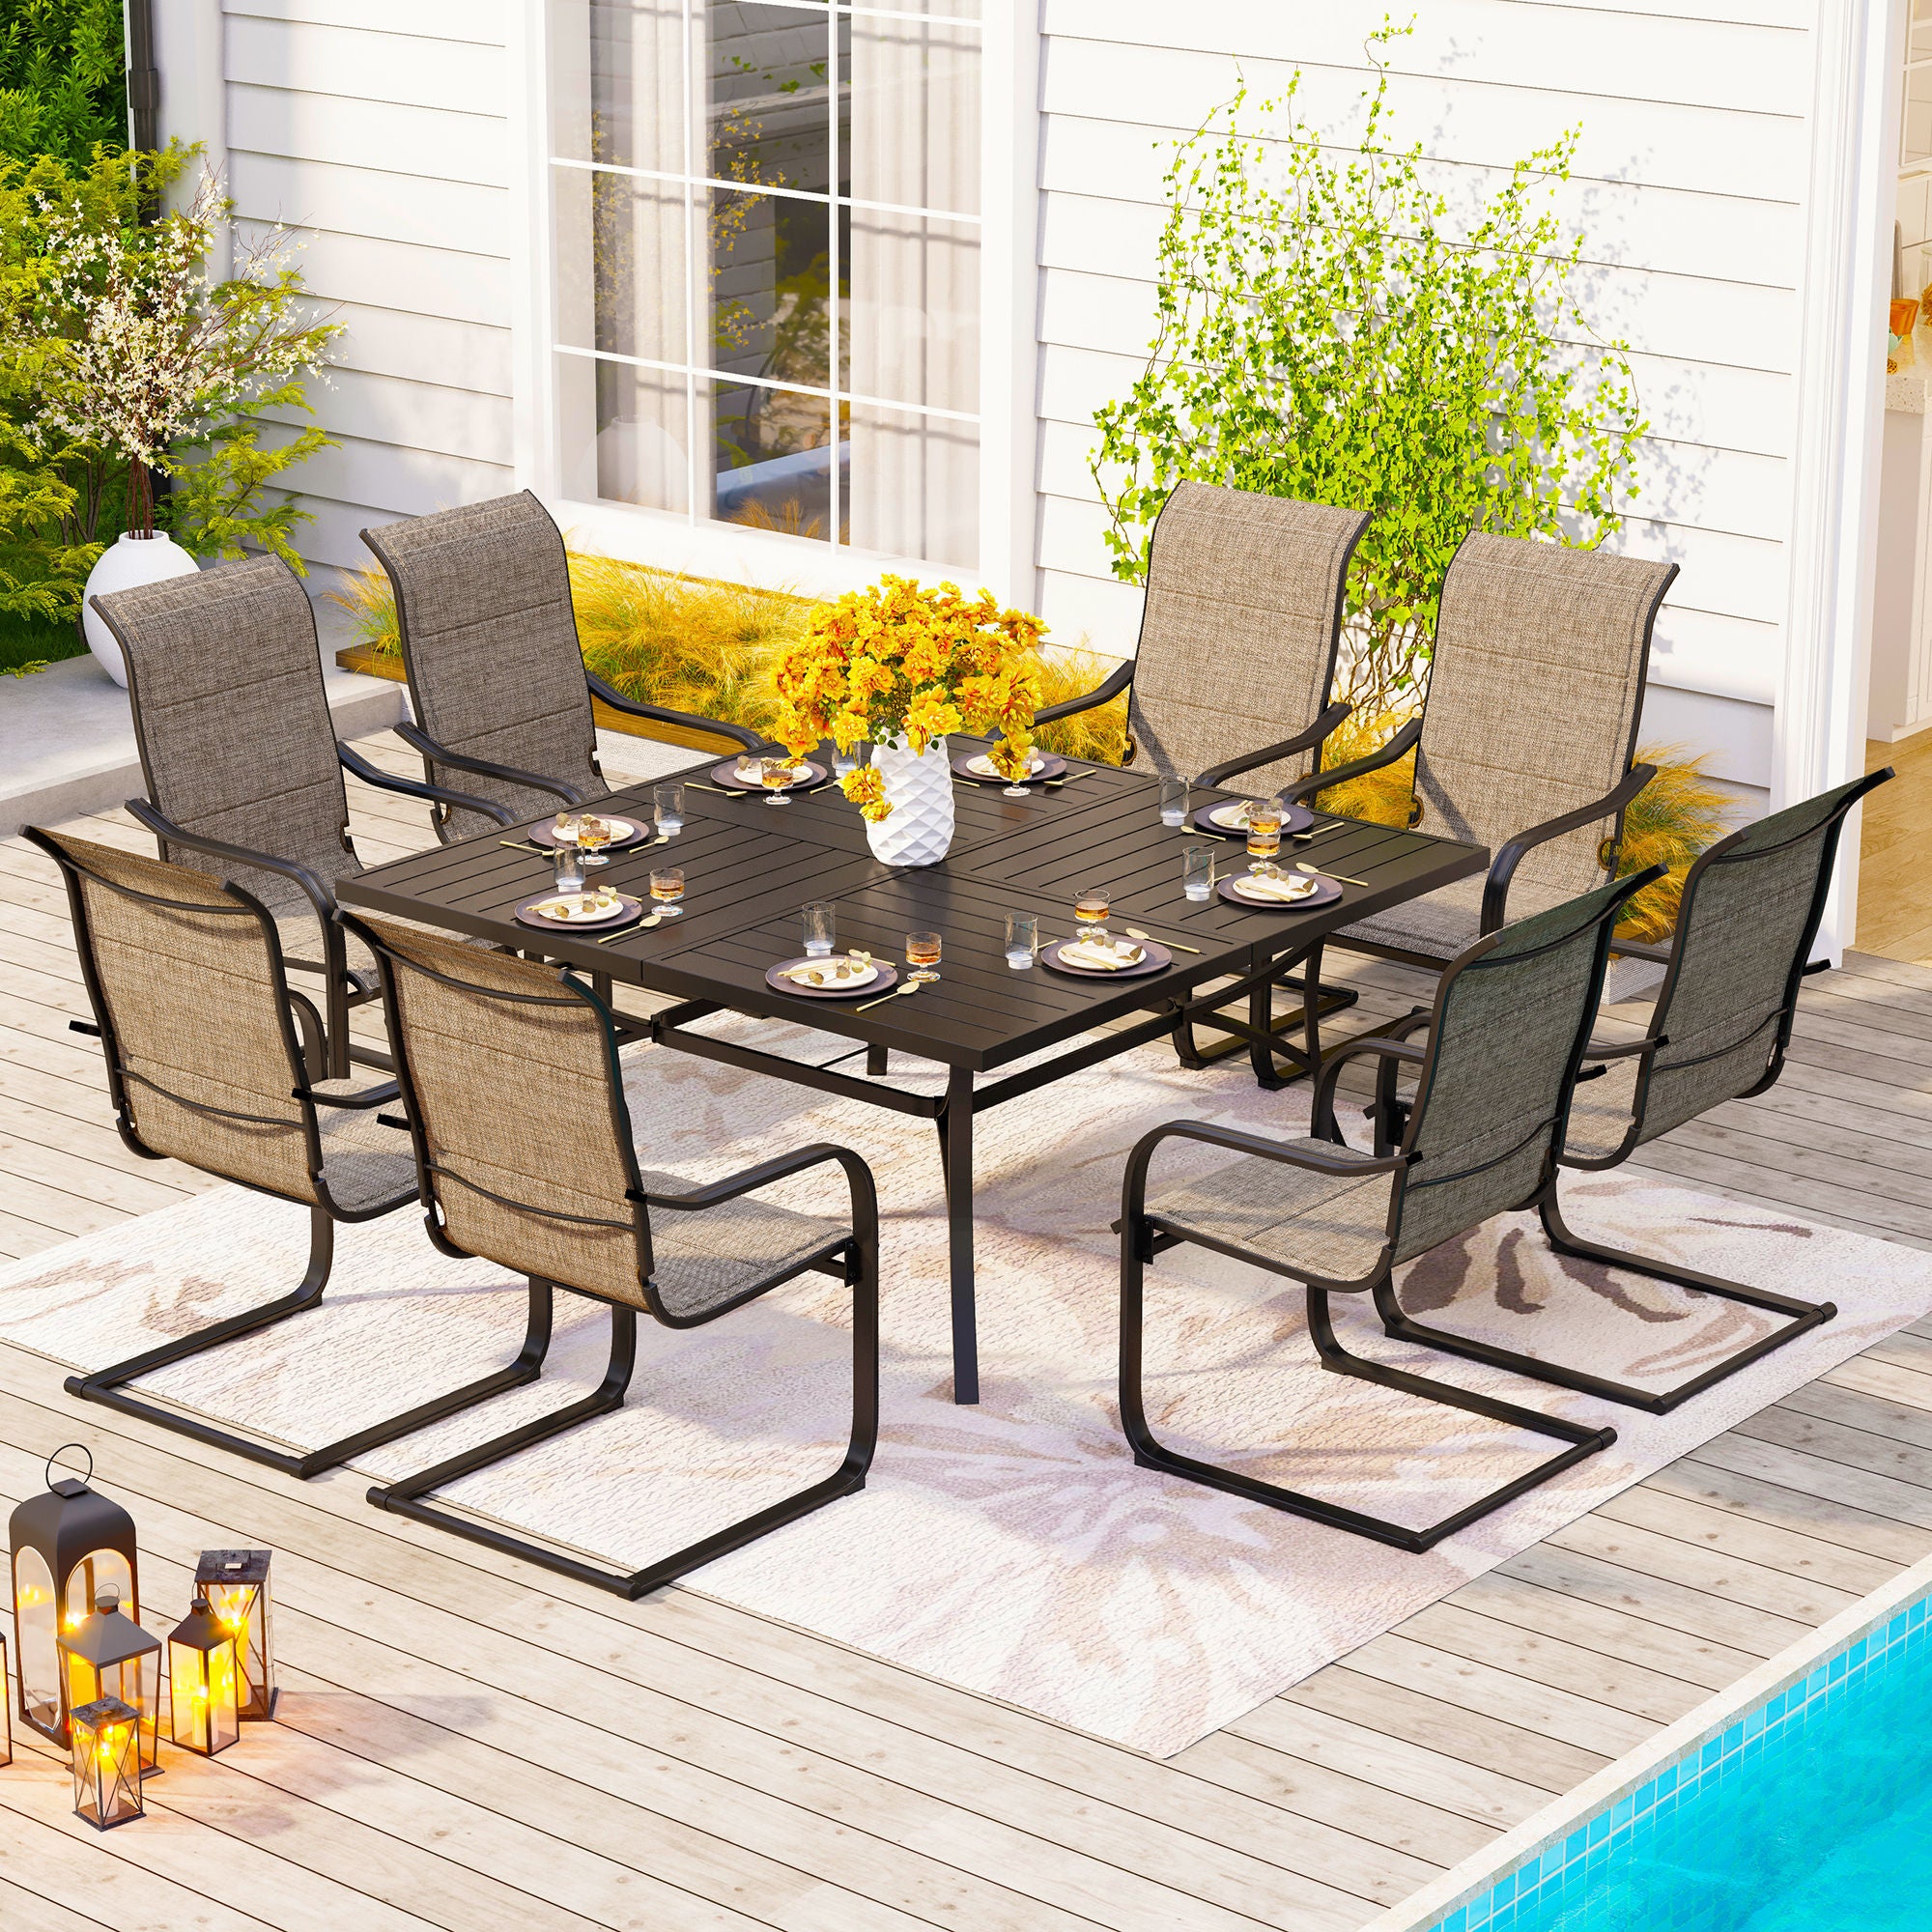 PHI VILLA 9-Piece Patio Dining Sets Extra Large Square Table & Textilene C-spring Chairs